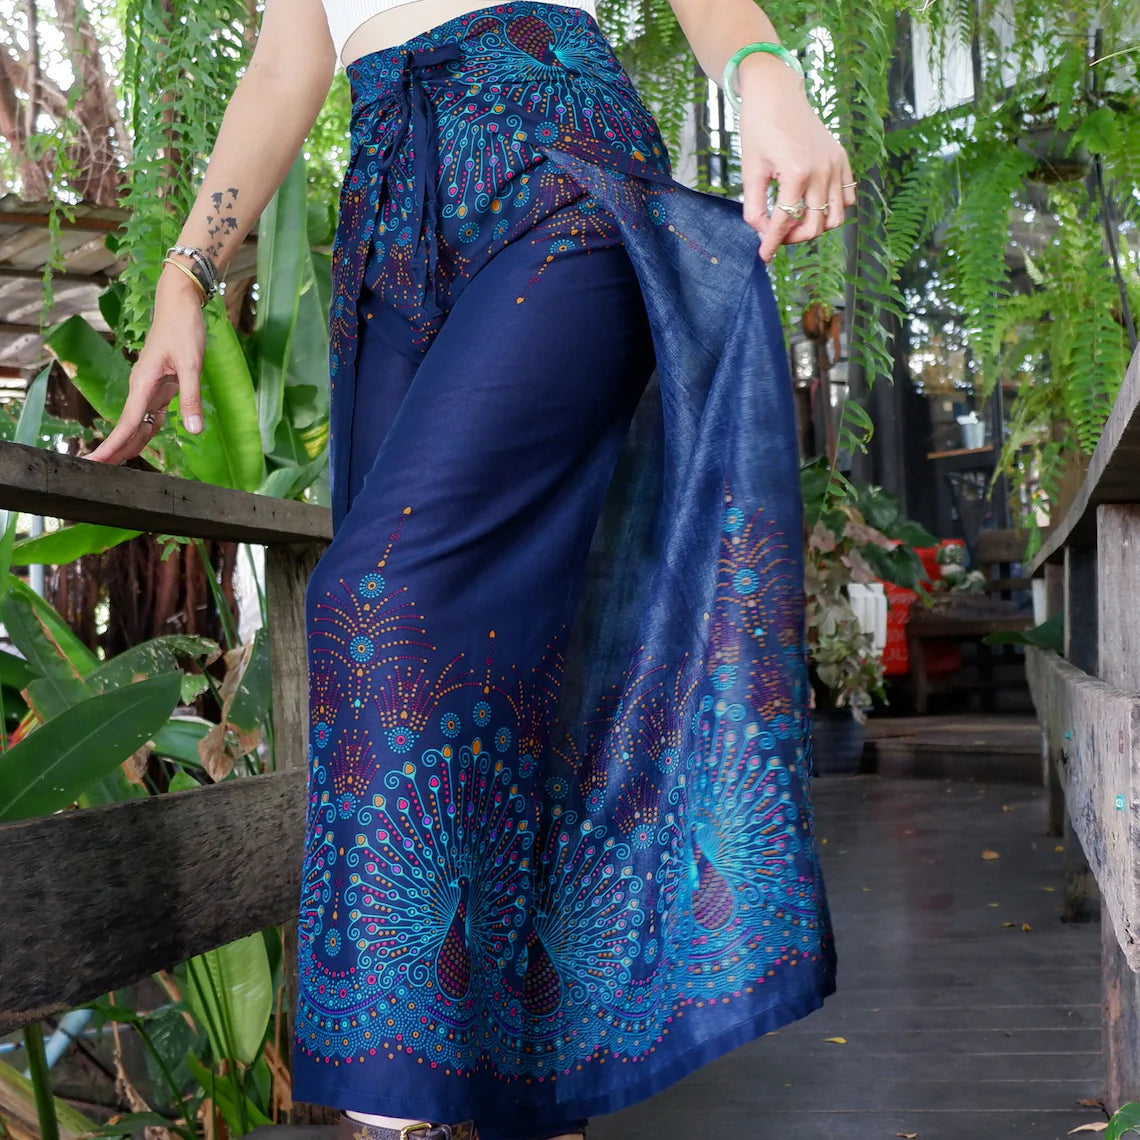 Chic Navy Blue Boho Peacock Print Wrap Pants in Lush Outdoor Ambiance